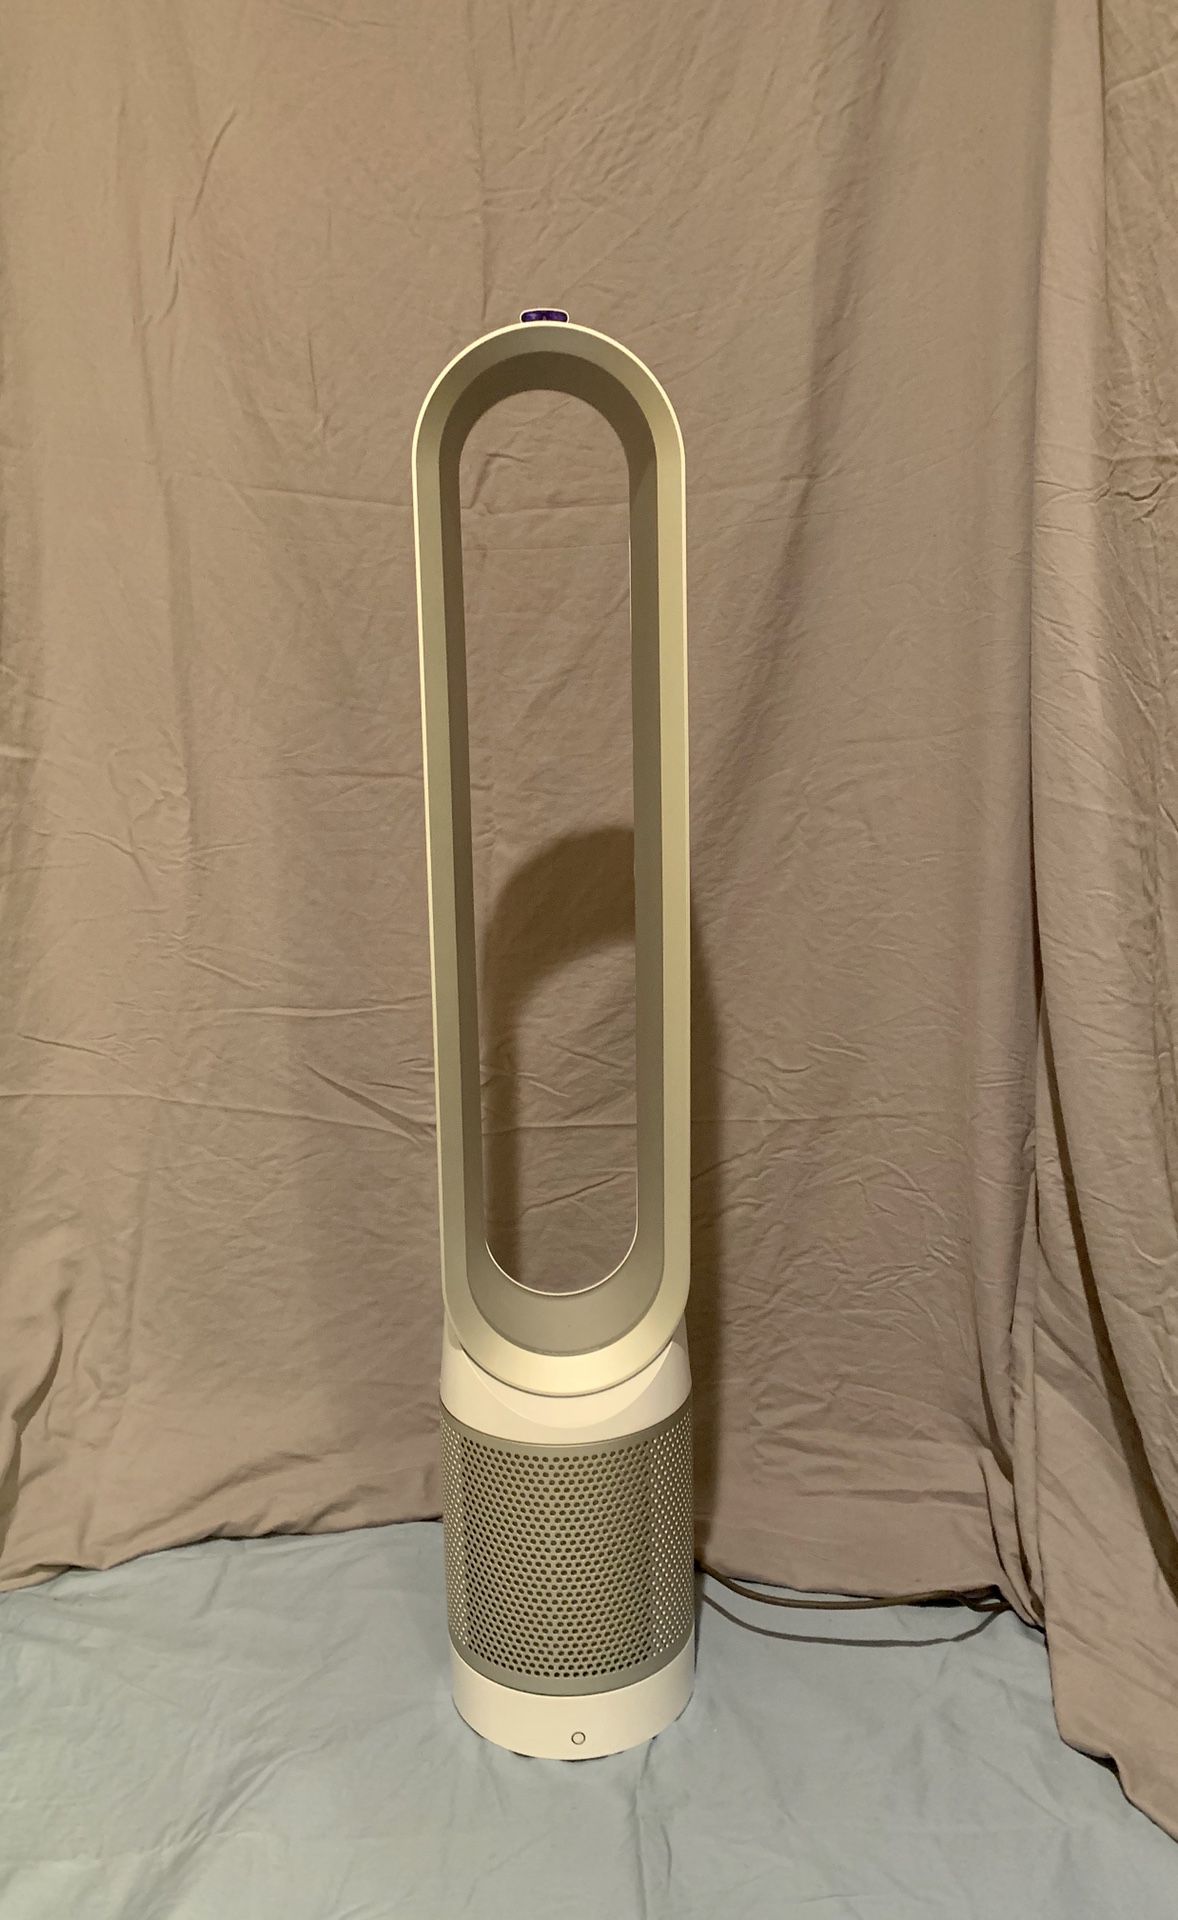 Dyson Pure Cool Link Tower TP01